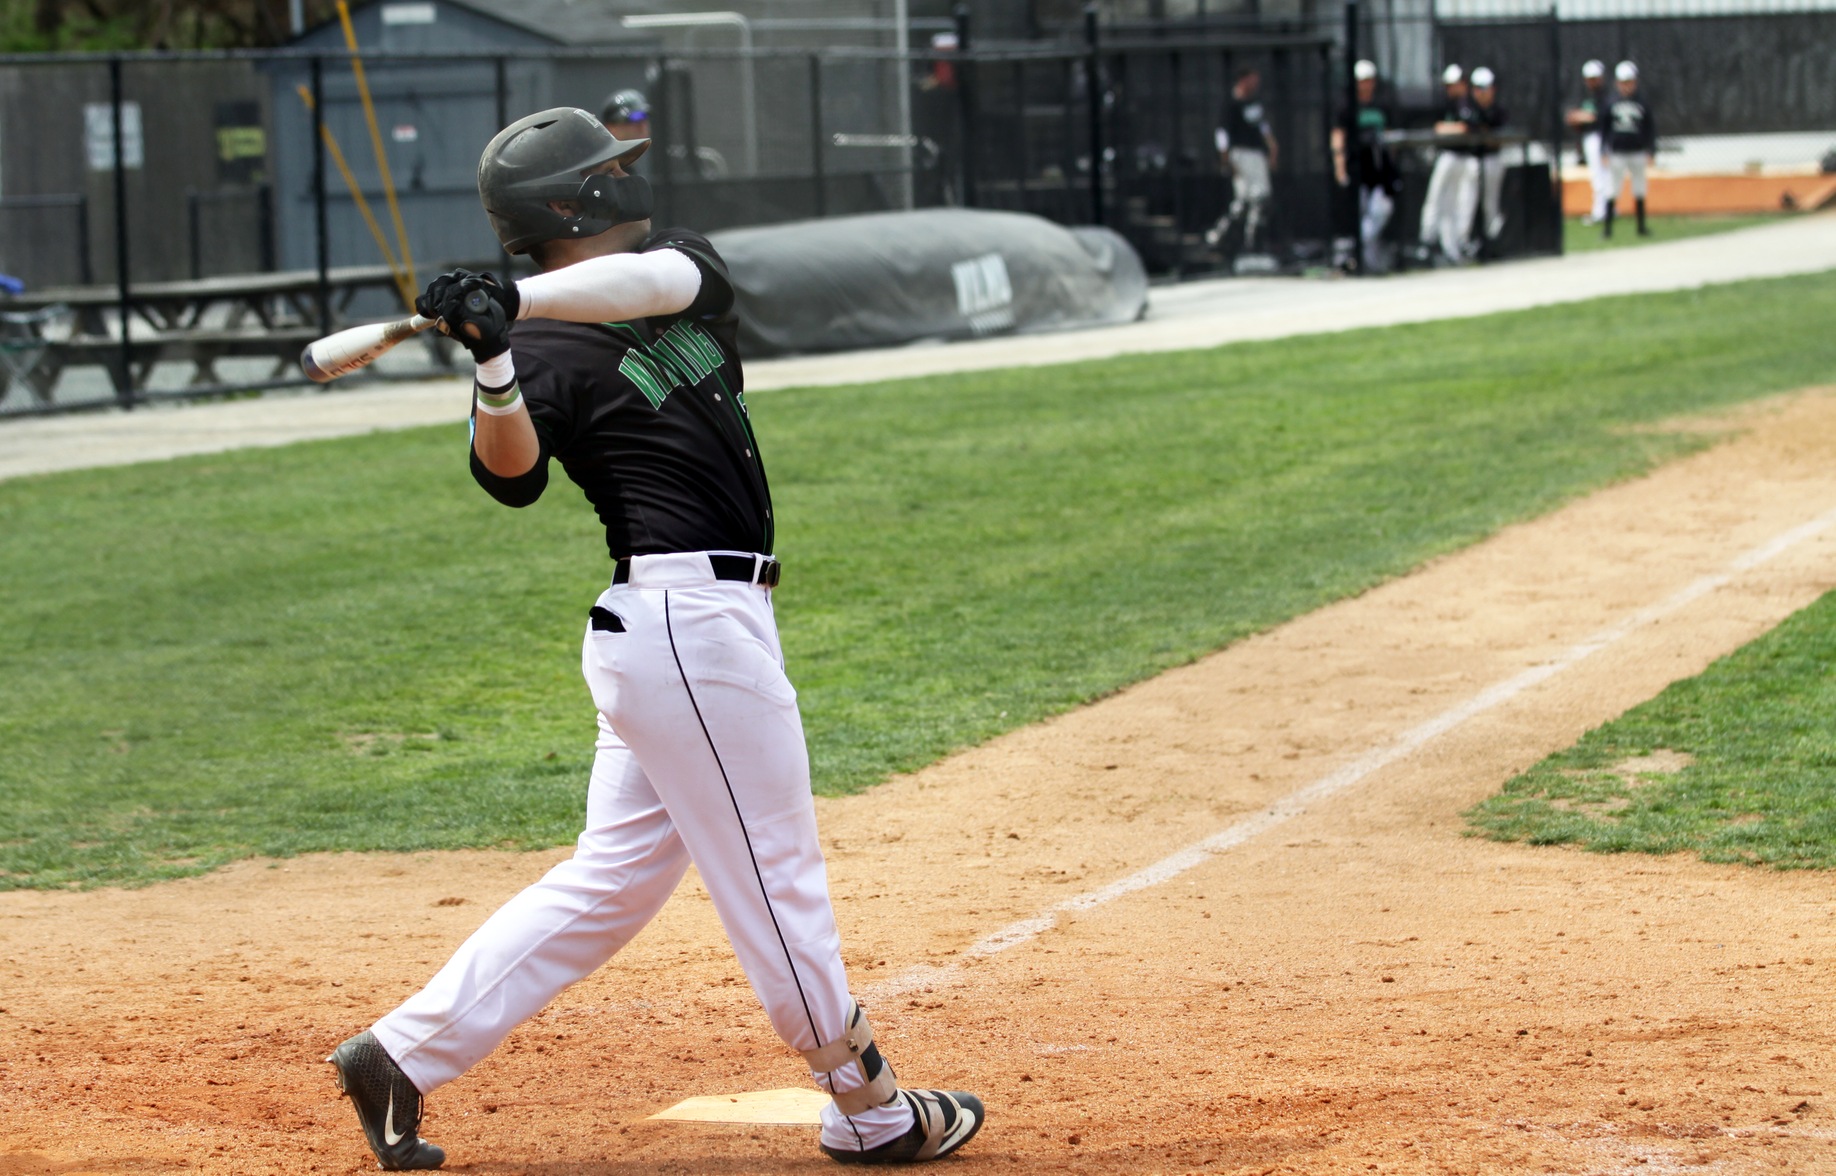 Copyright 2019: Wilmington University. All rights reserved. File photo of Kendall Small who became the all-time leader in RBI on Saturday. Taken by Katlynne Tubo. April 12, 2019 vs. Felicain.